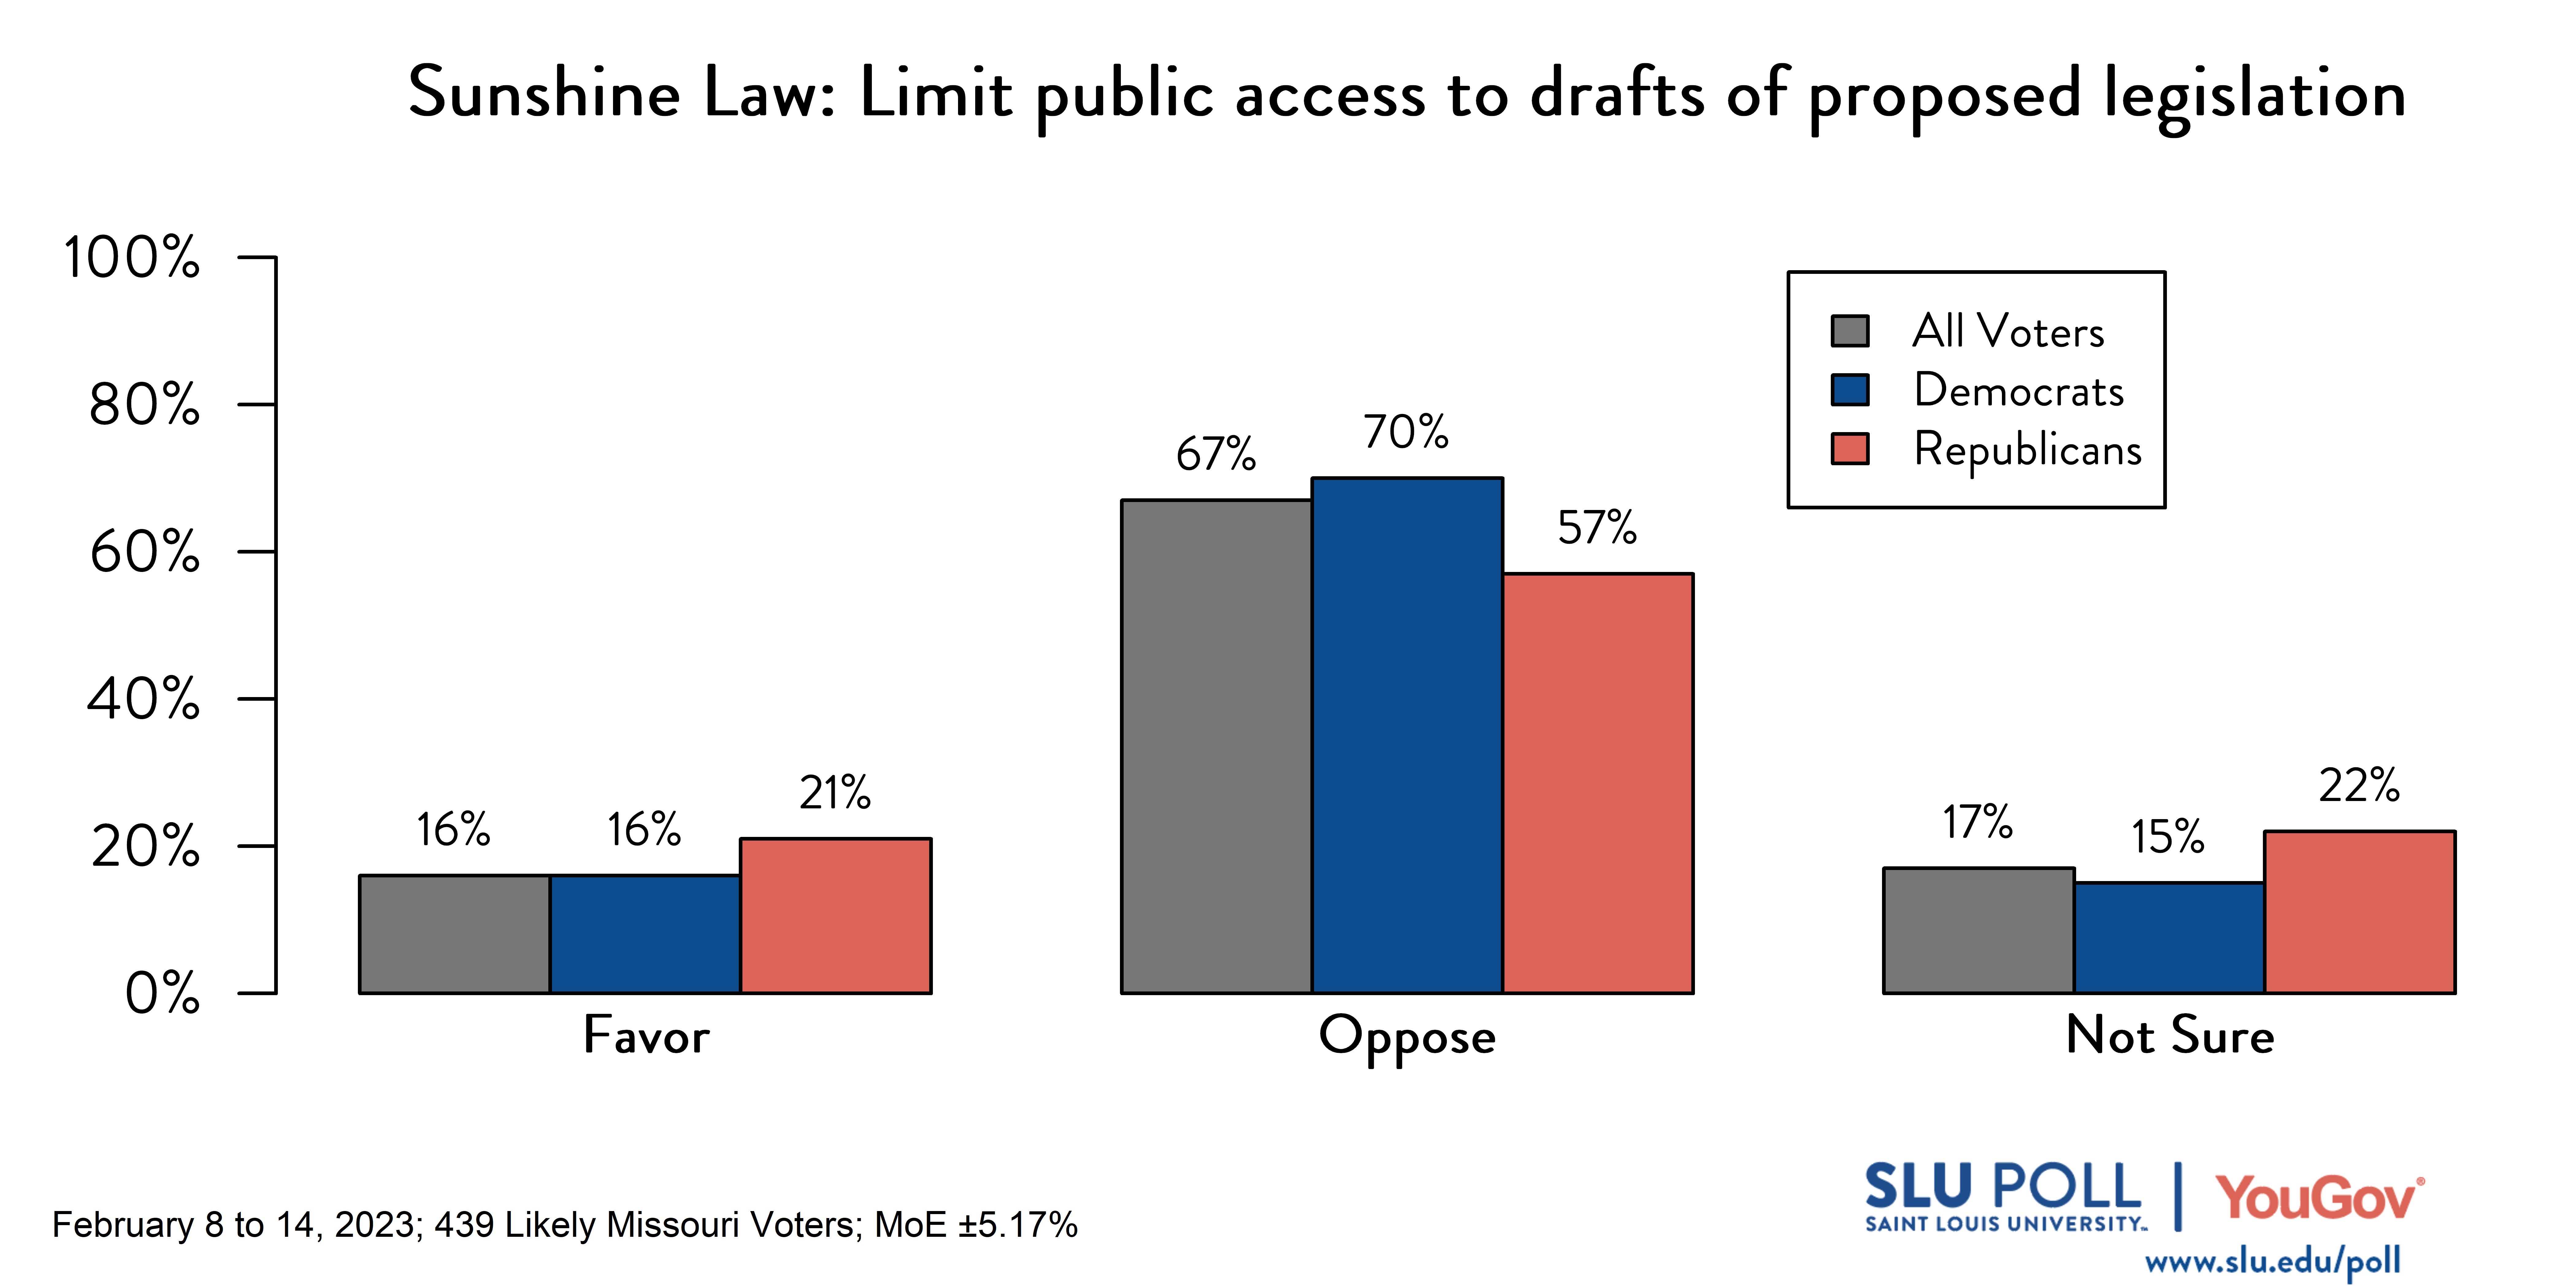 Likely voters' responses to 'Missouri's Sunshine Act allows the public to make requests for government documents (e.g., meeting records or public officials' communications). Do you favor or oppose the following changes to Sunshine Act: Limit public access to drafts of proposed legislation?': 16% Favor, 67% Oppose, and 17% Not sure. Democratic voters' responses: ' 16% Favor, 70% Oppose, and 15% Not sure. Republican voters' responses: 21% Favor, 57% Oppose, and 22% Not sure.